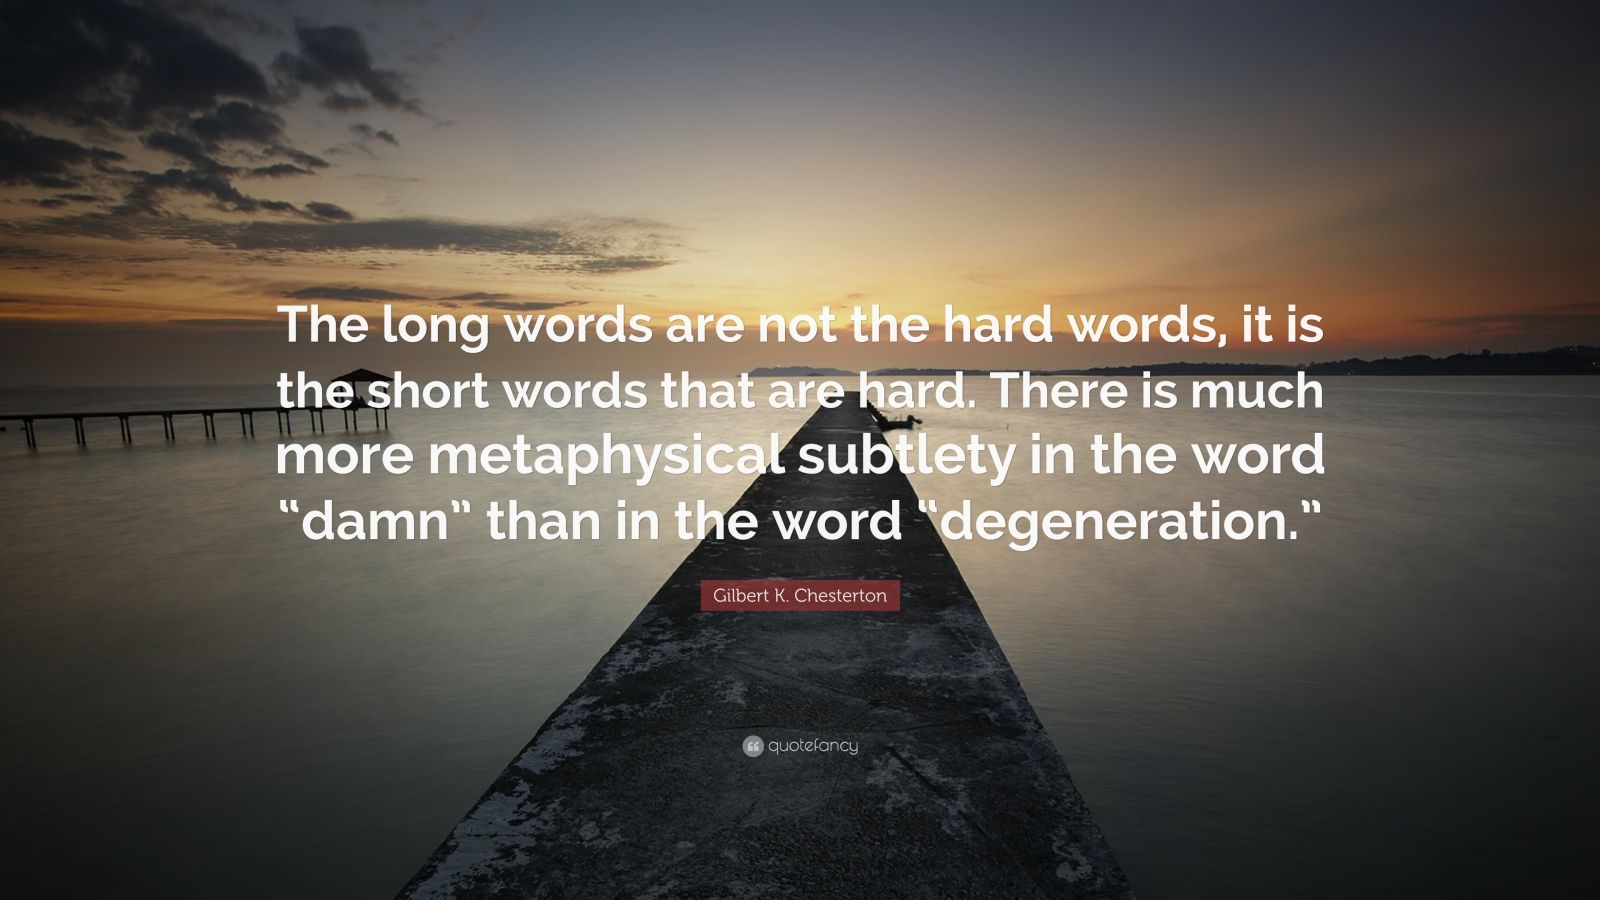 Gilbert K. Chesterton Quote: “The long words are not the hard words, it is the short words that are hard. There is much more metaphysical subtlety in .”